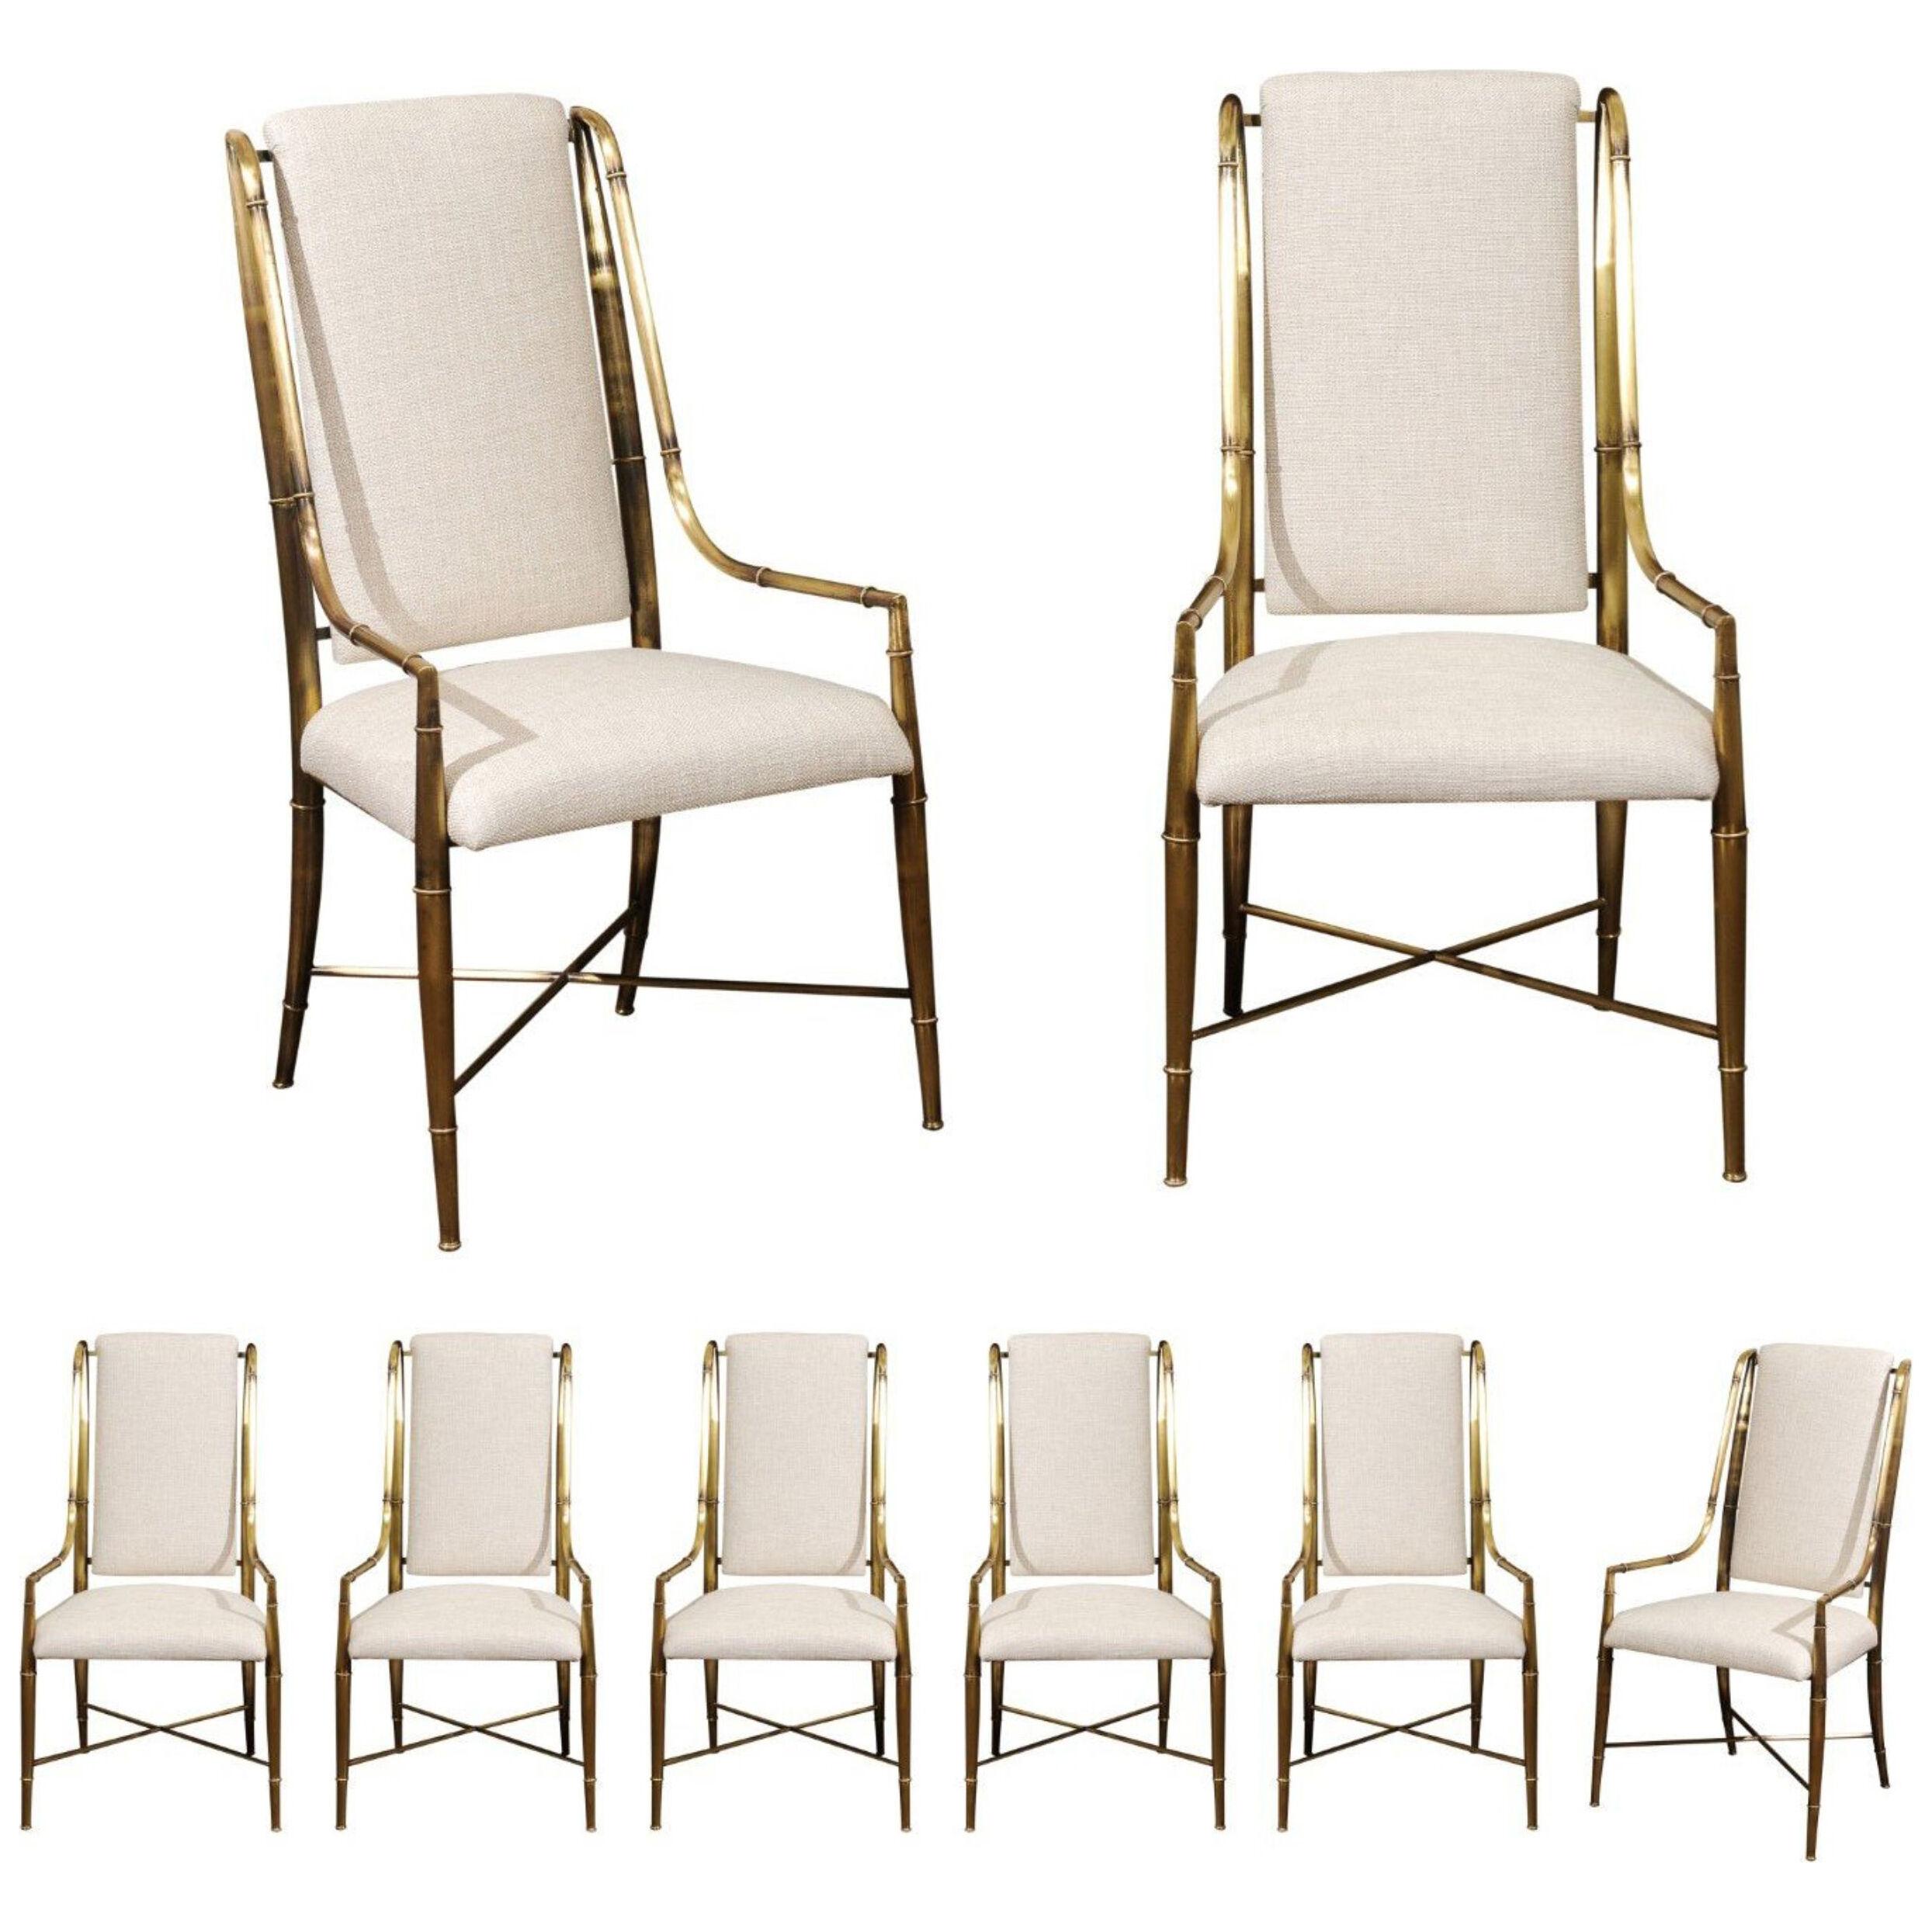 Magnificent Set of Ten Dining Chairs by Weiman/Warren Lloyd for Mastercraft